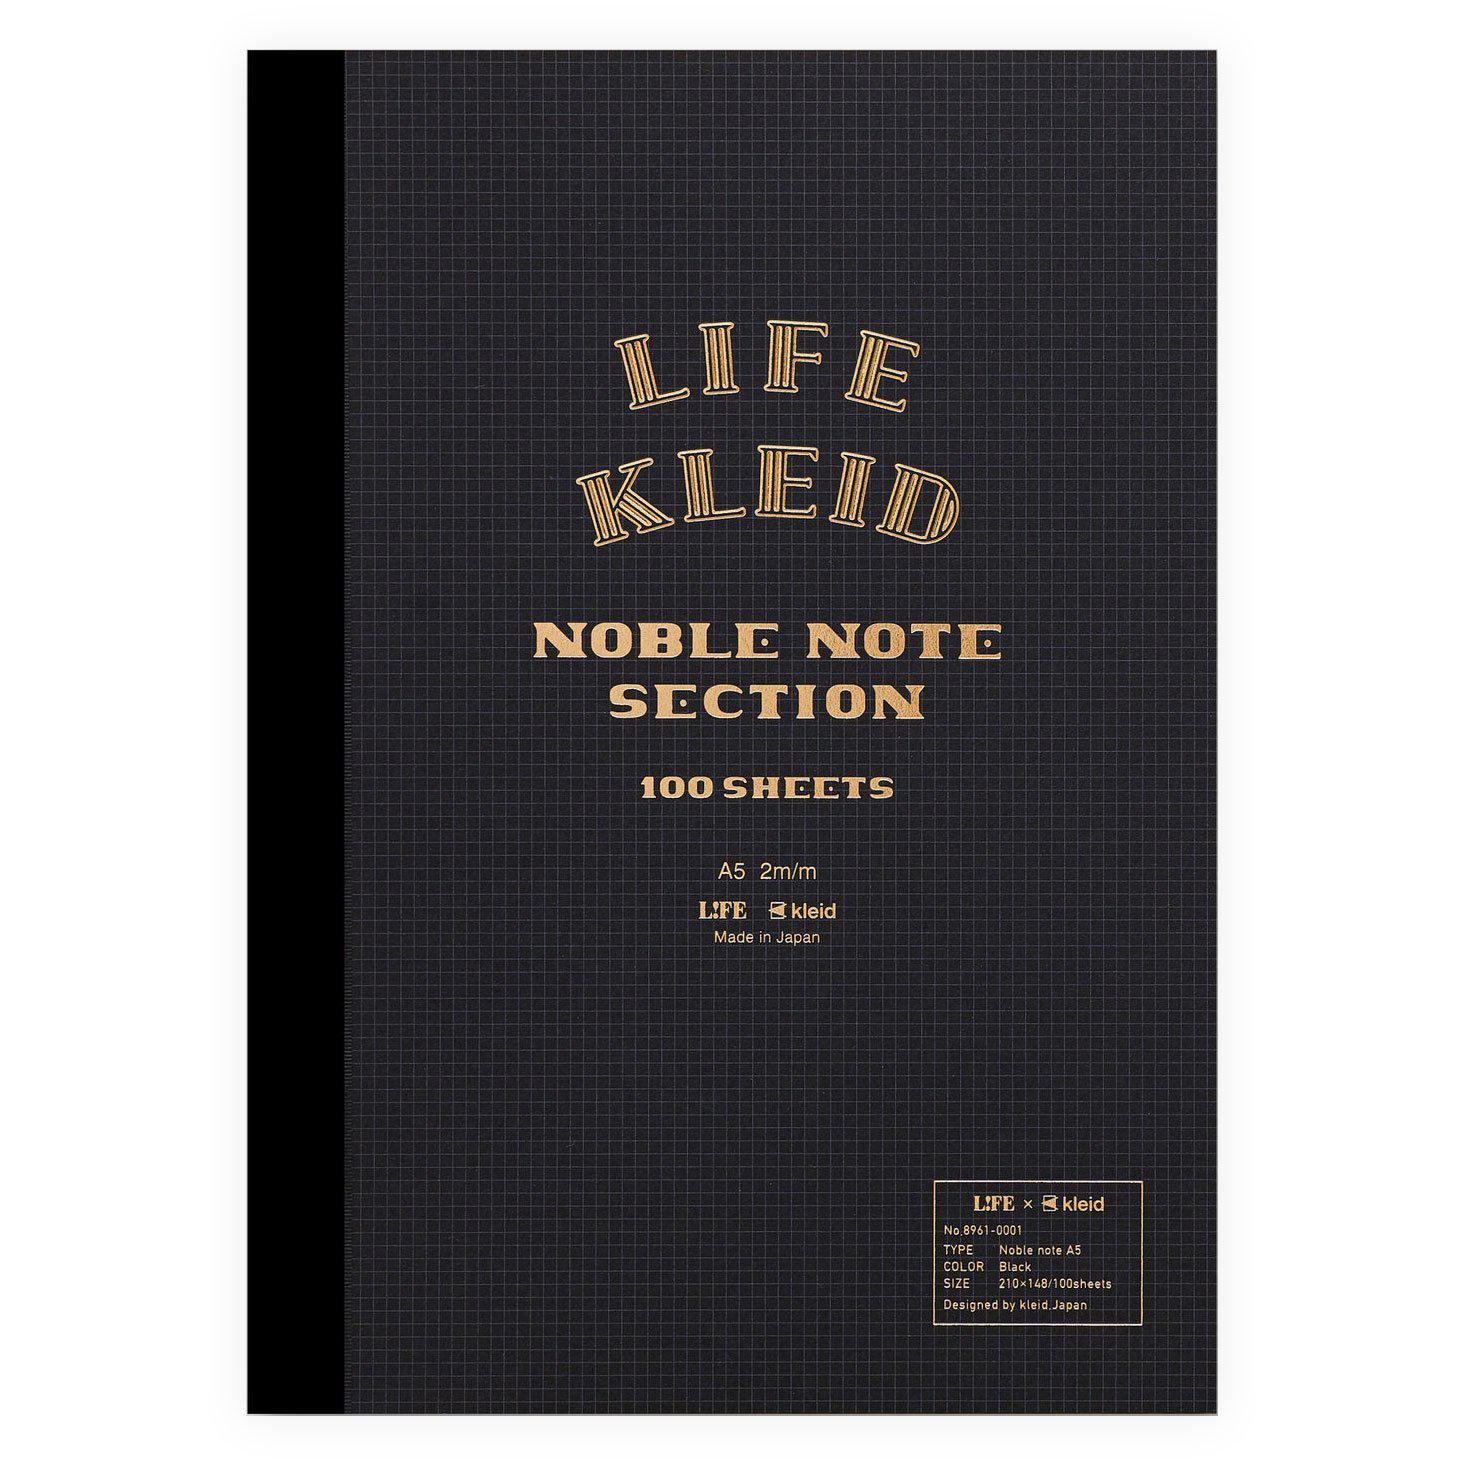 LIFE Kleid x LIFE Noble Note Notebook Black With Cream Pages 